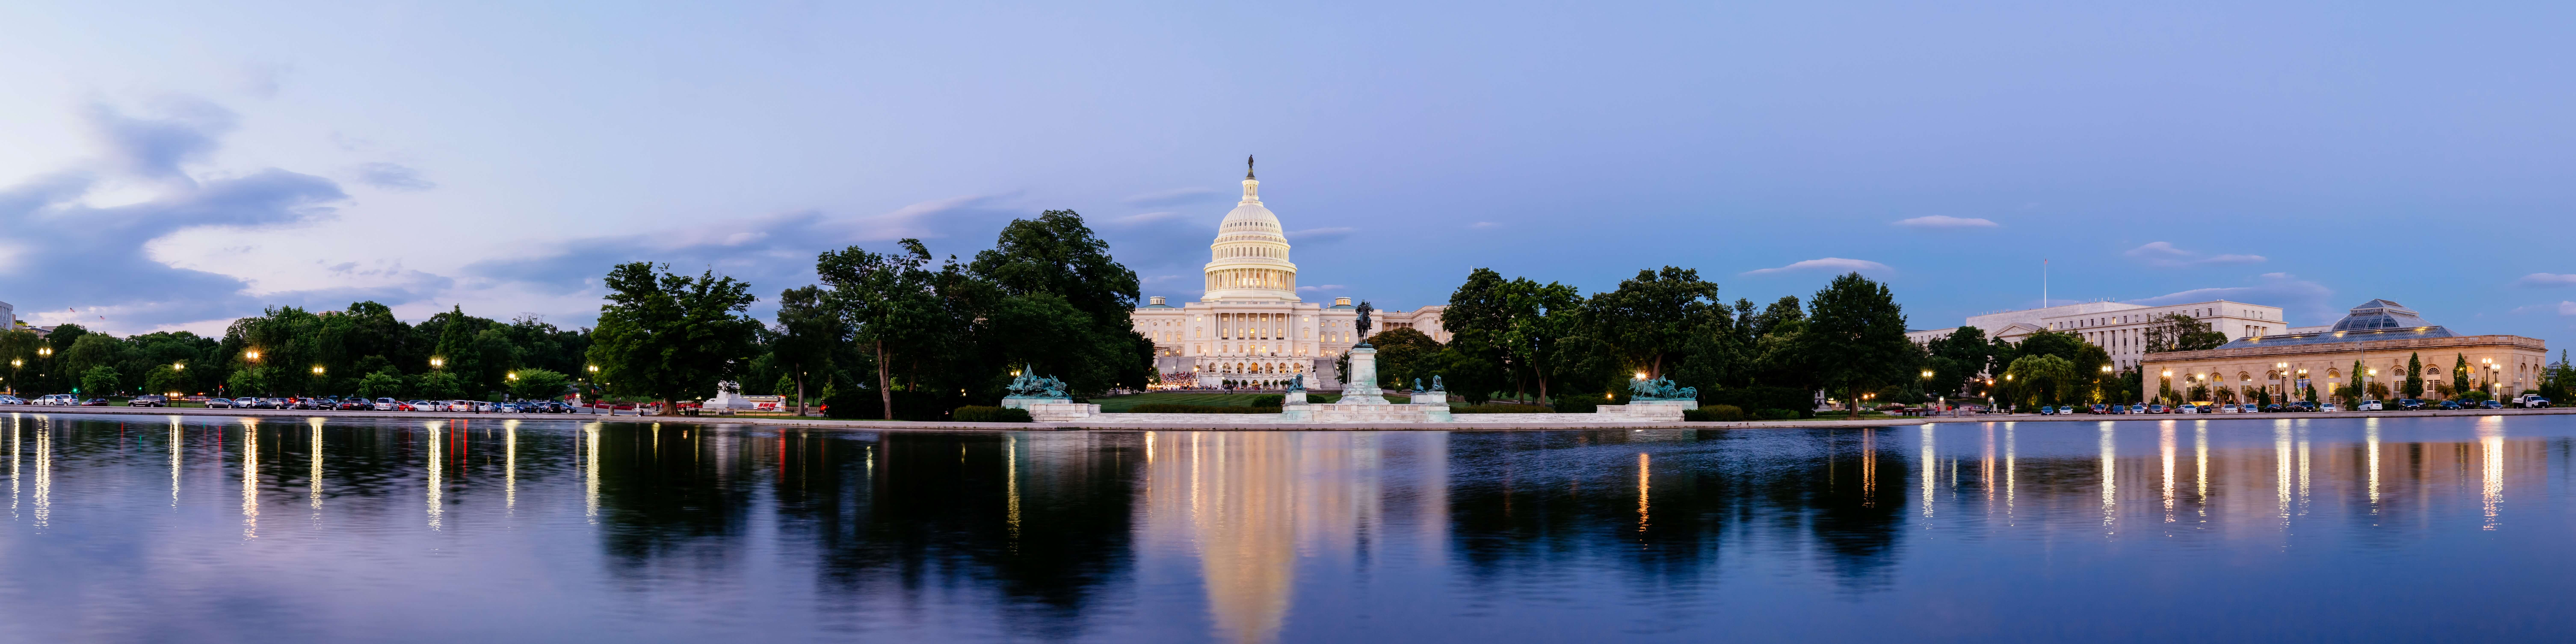 image of DC on our online chiropractic continuing education courses blog page